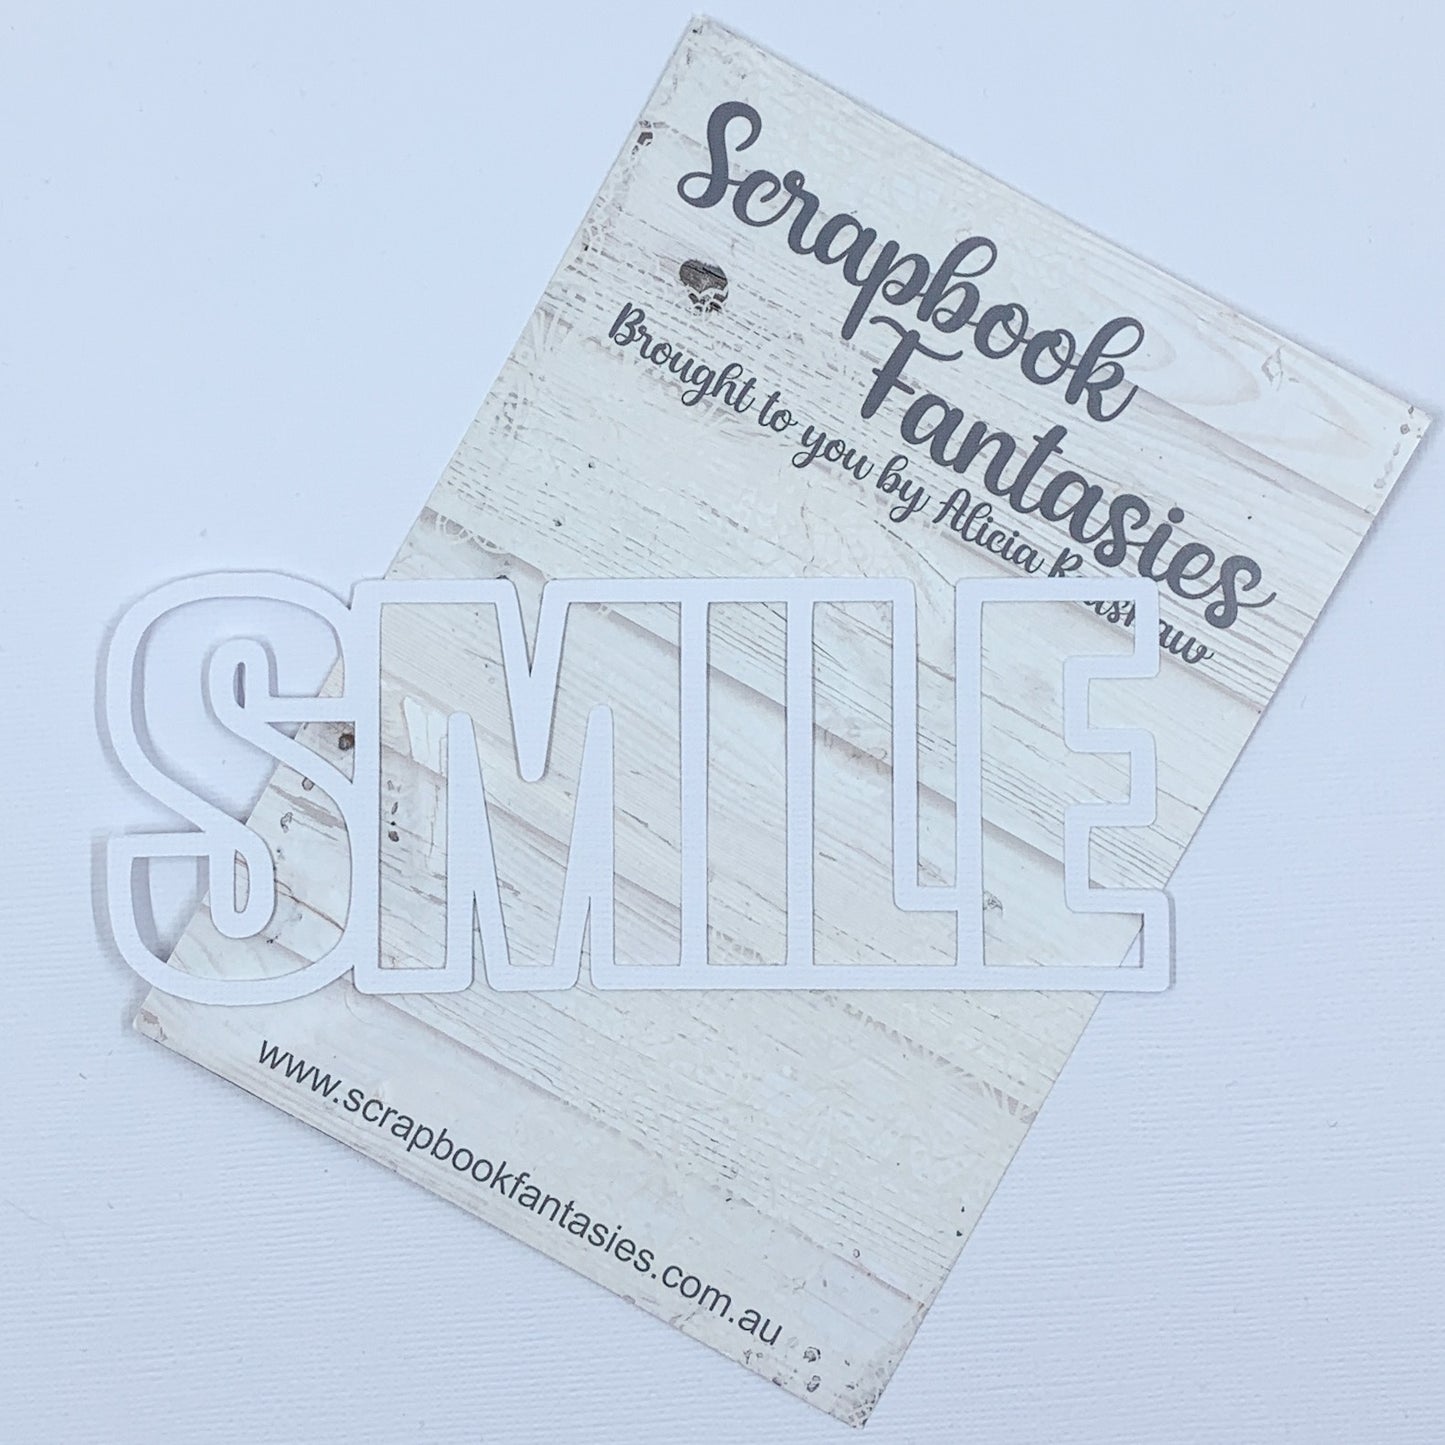 Runaway Princess - Smile (open) 2.25"x5.75" White Linen Cardstock Title-Cut - Designed by Alicia Redshaw